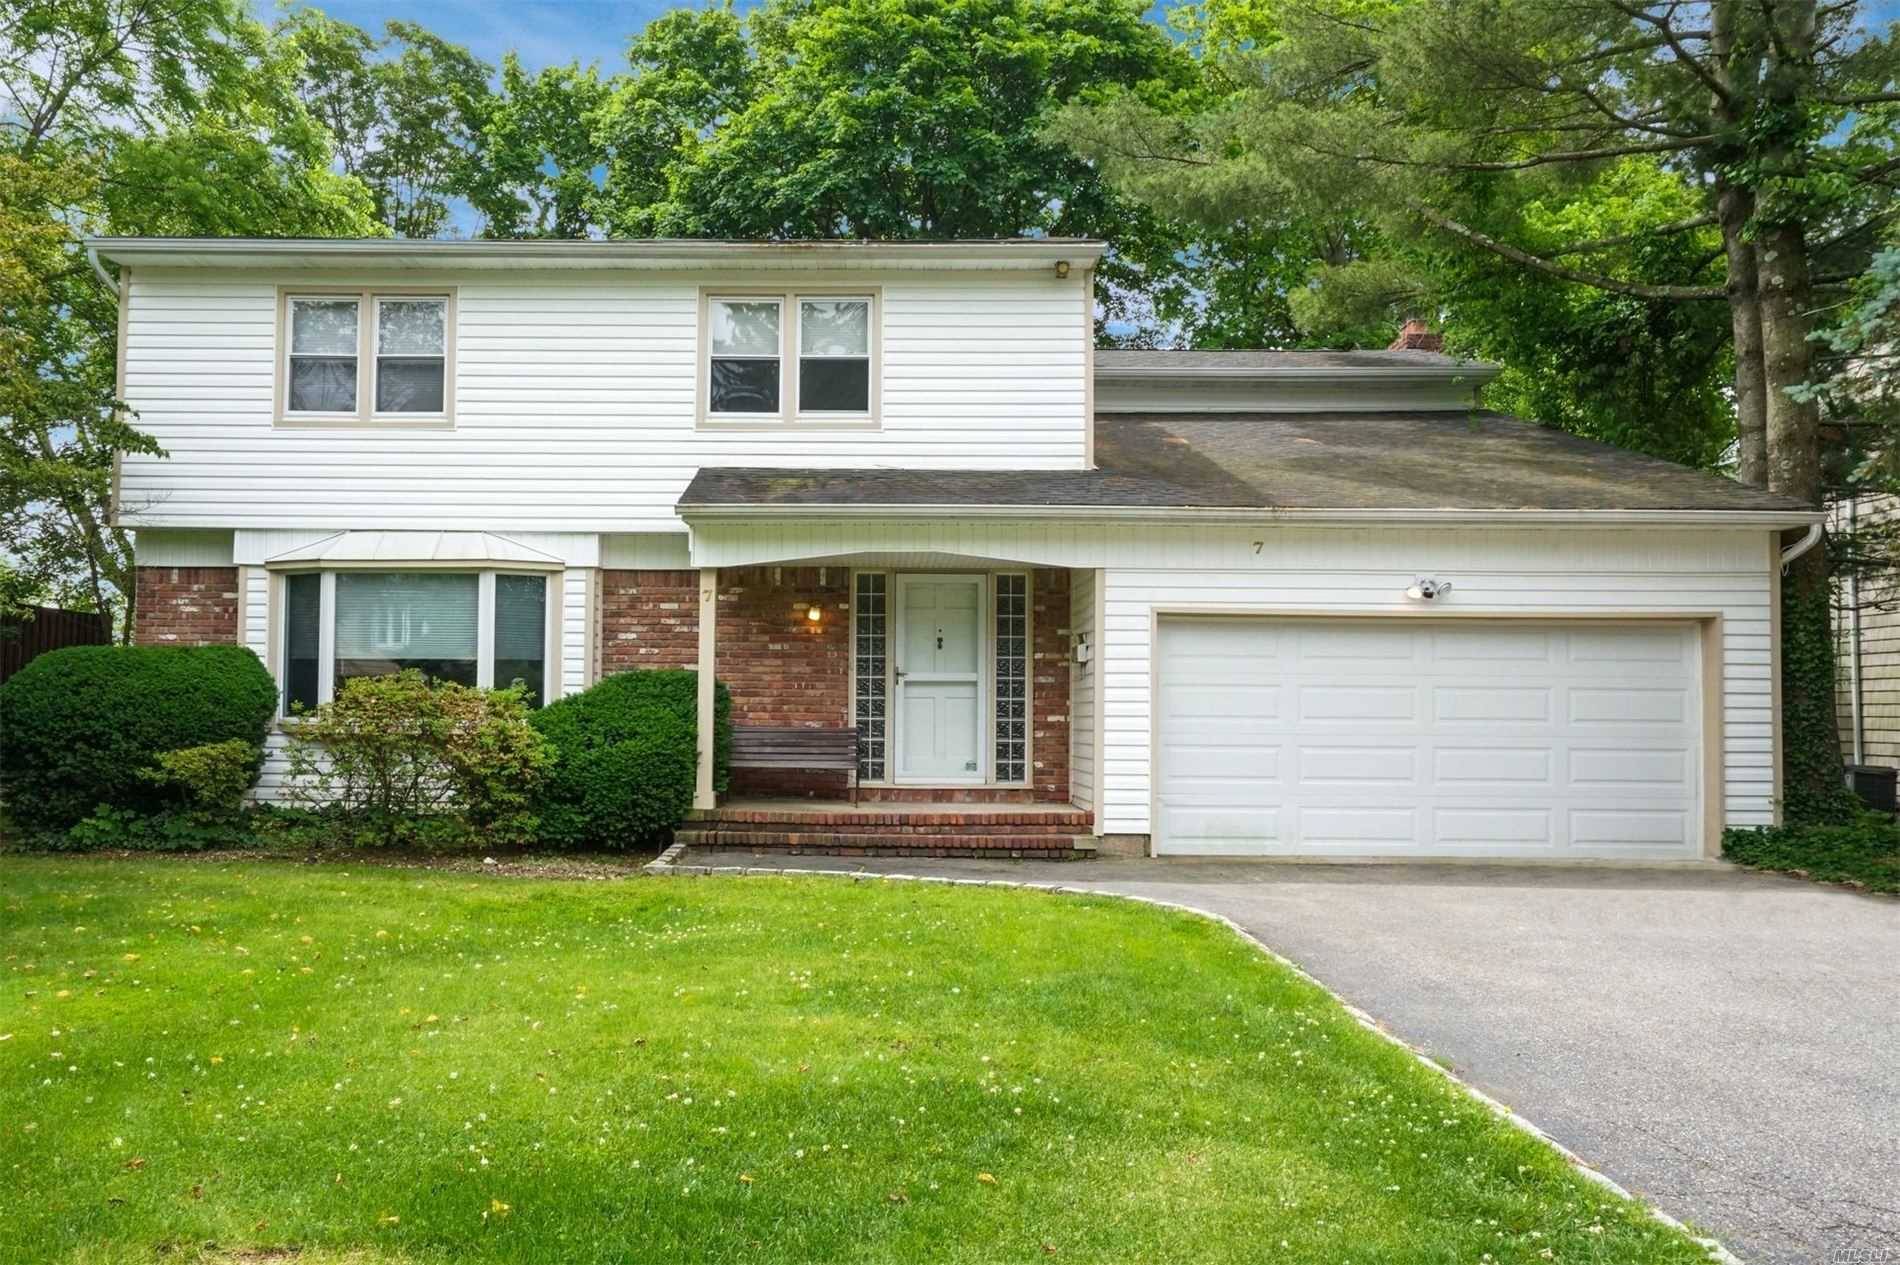 North Syosset young 2380 sq ft home located in a cul de sac with an easy distance to train town.